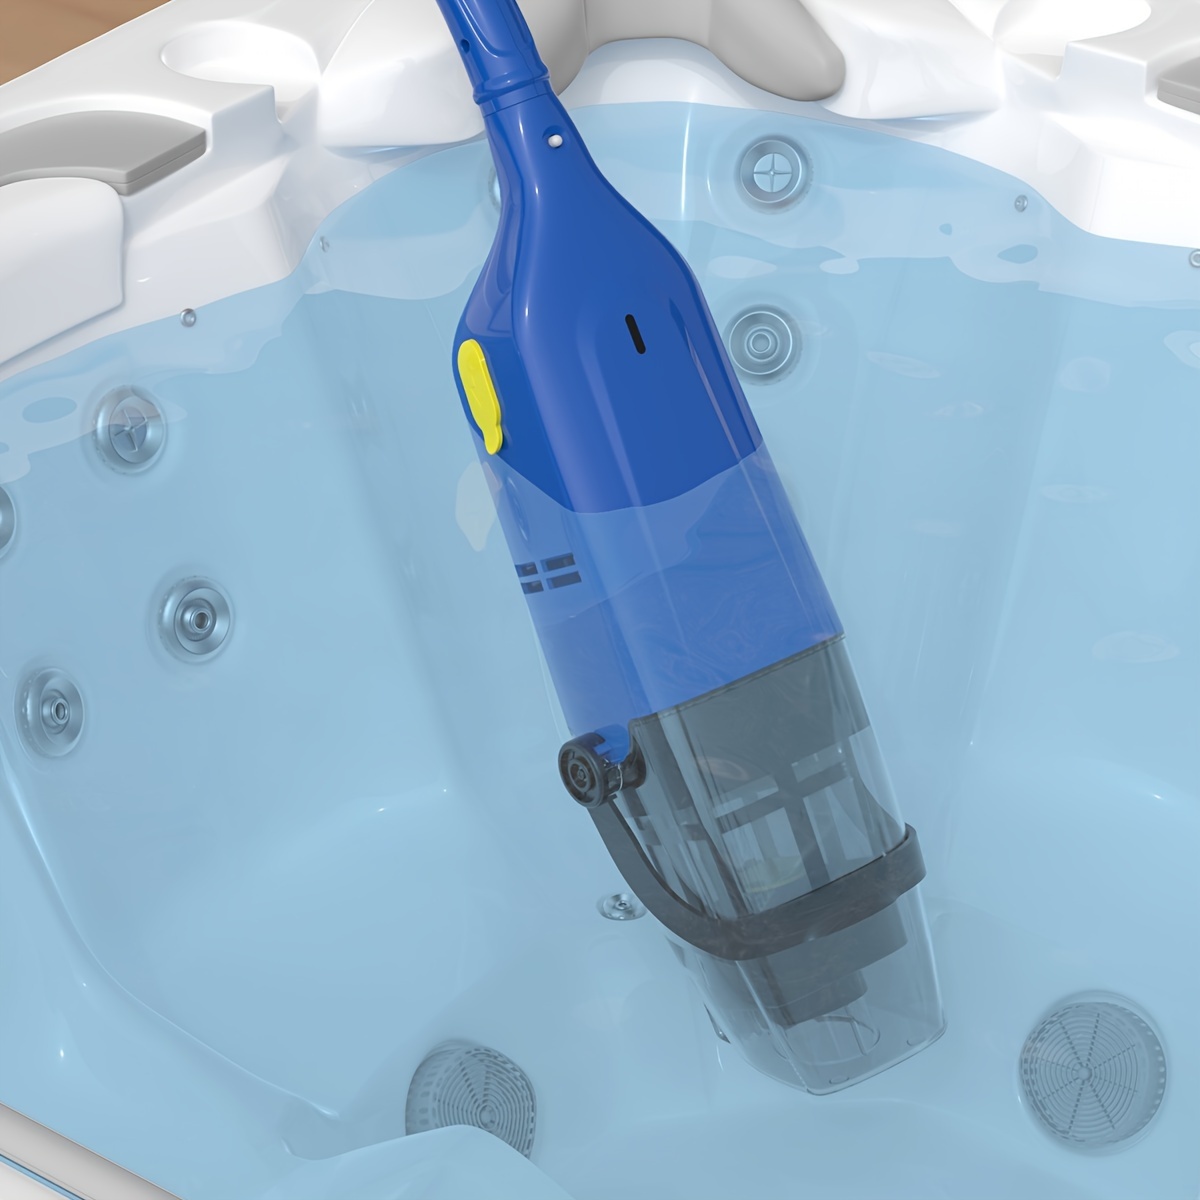 

Handheld Pool Vacuum Portable Pool Cleaner With Upgraded Powerful Suction Perfect For Above Ground Pools, Spas, Small Inground Swimming Pools For Cleaning Small Debris, Klein Blue